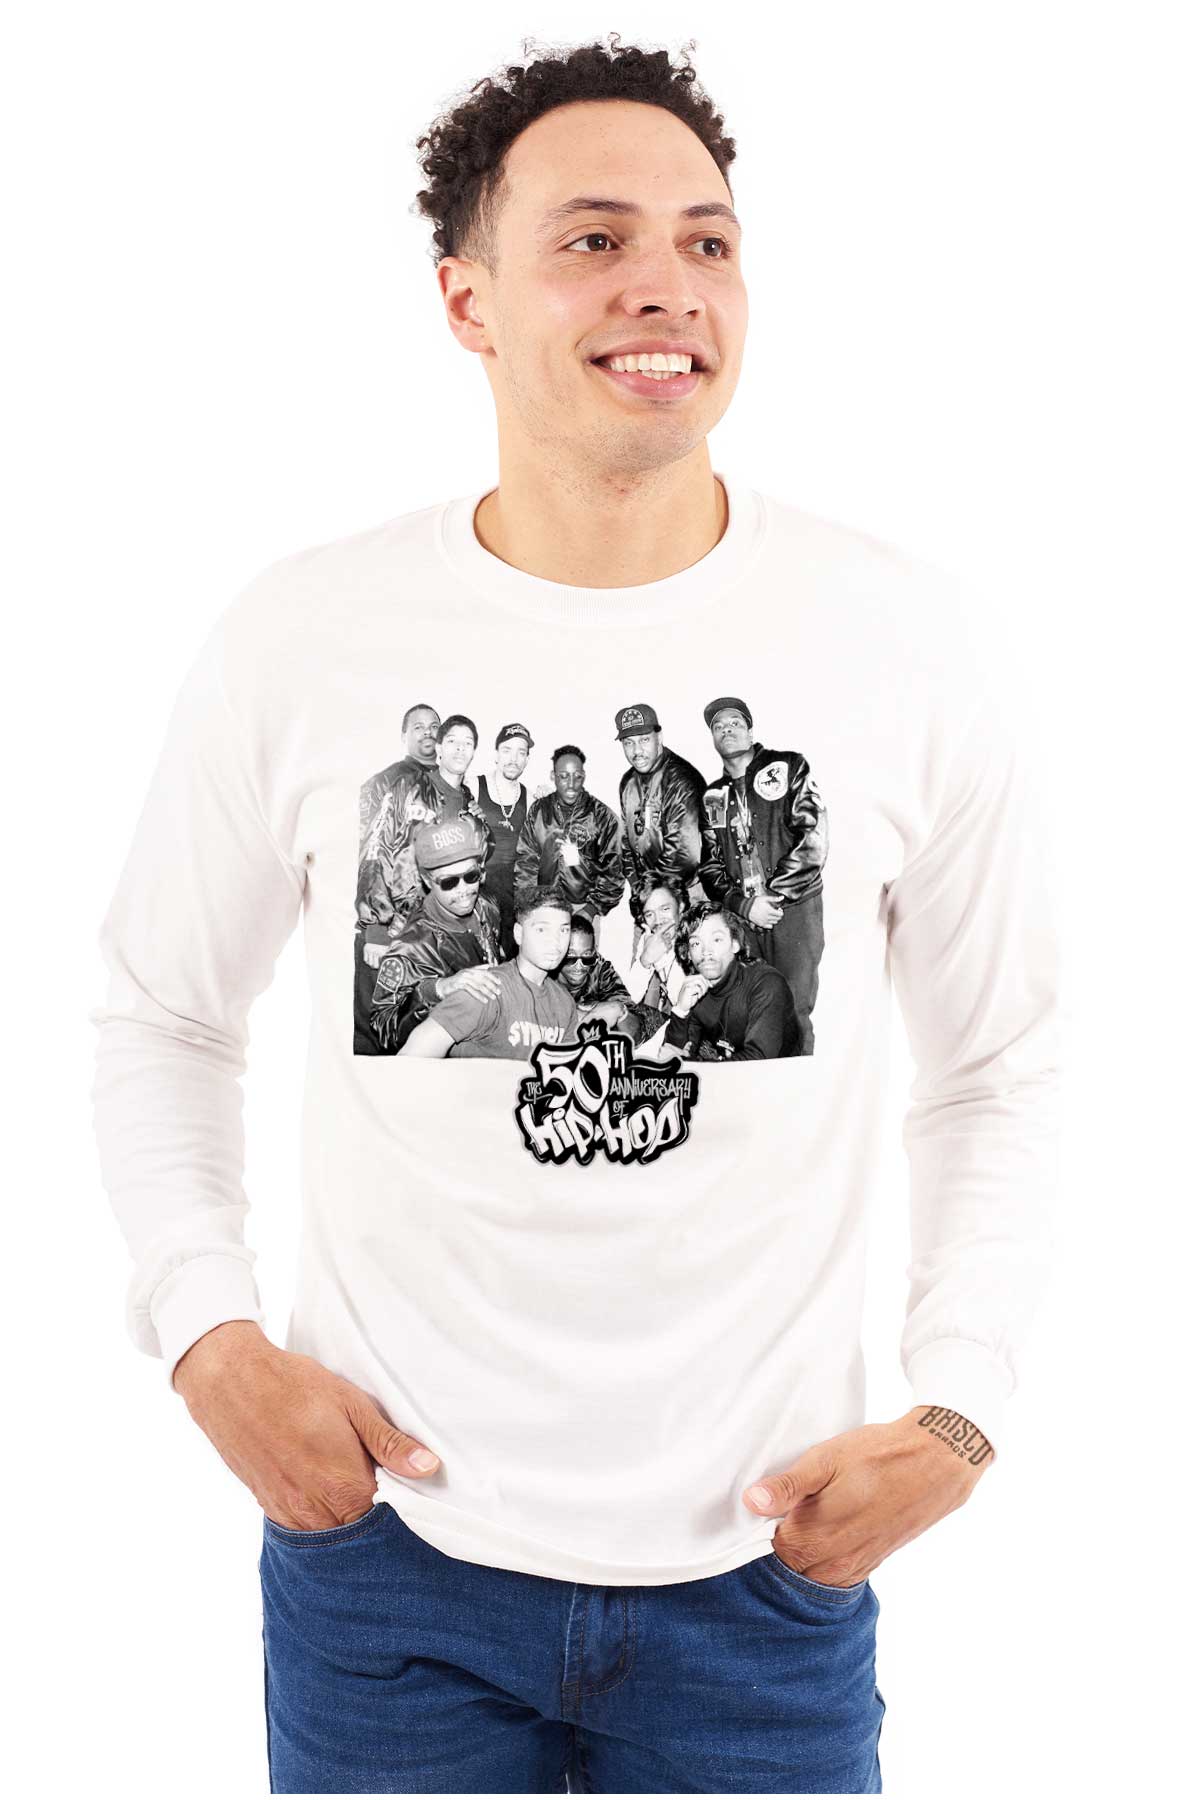 This image showcases a powerful visual narrative of a historical moment captured. It features Ice T and his Rhythm Syndicate crew representing the foundation of hip-hop culture.